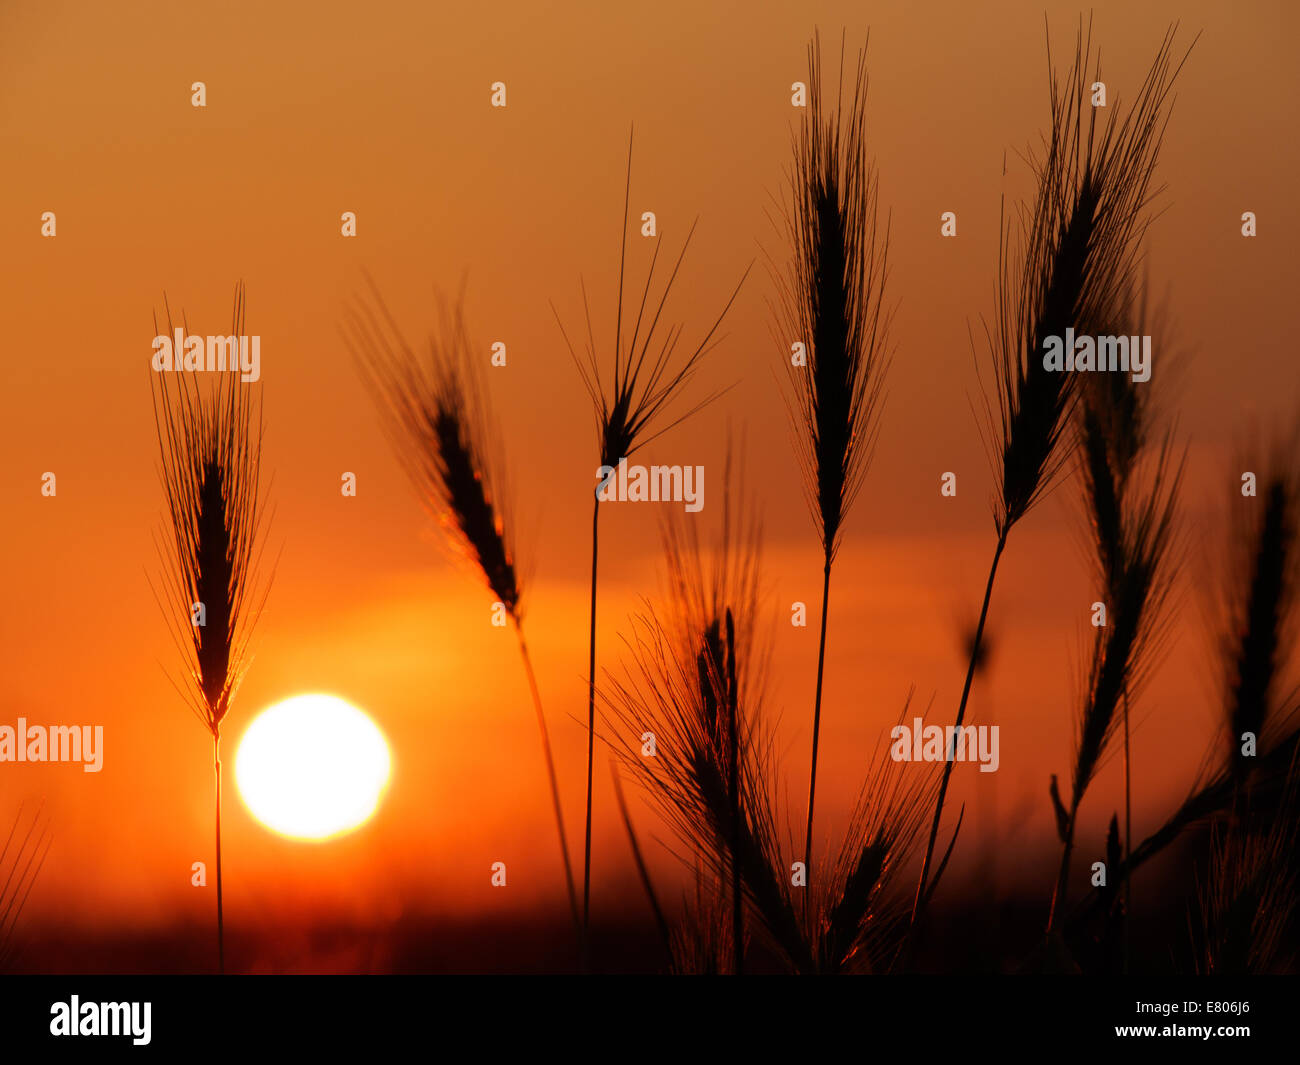 Silhouette sunset. with strands of grass Stock Photo